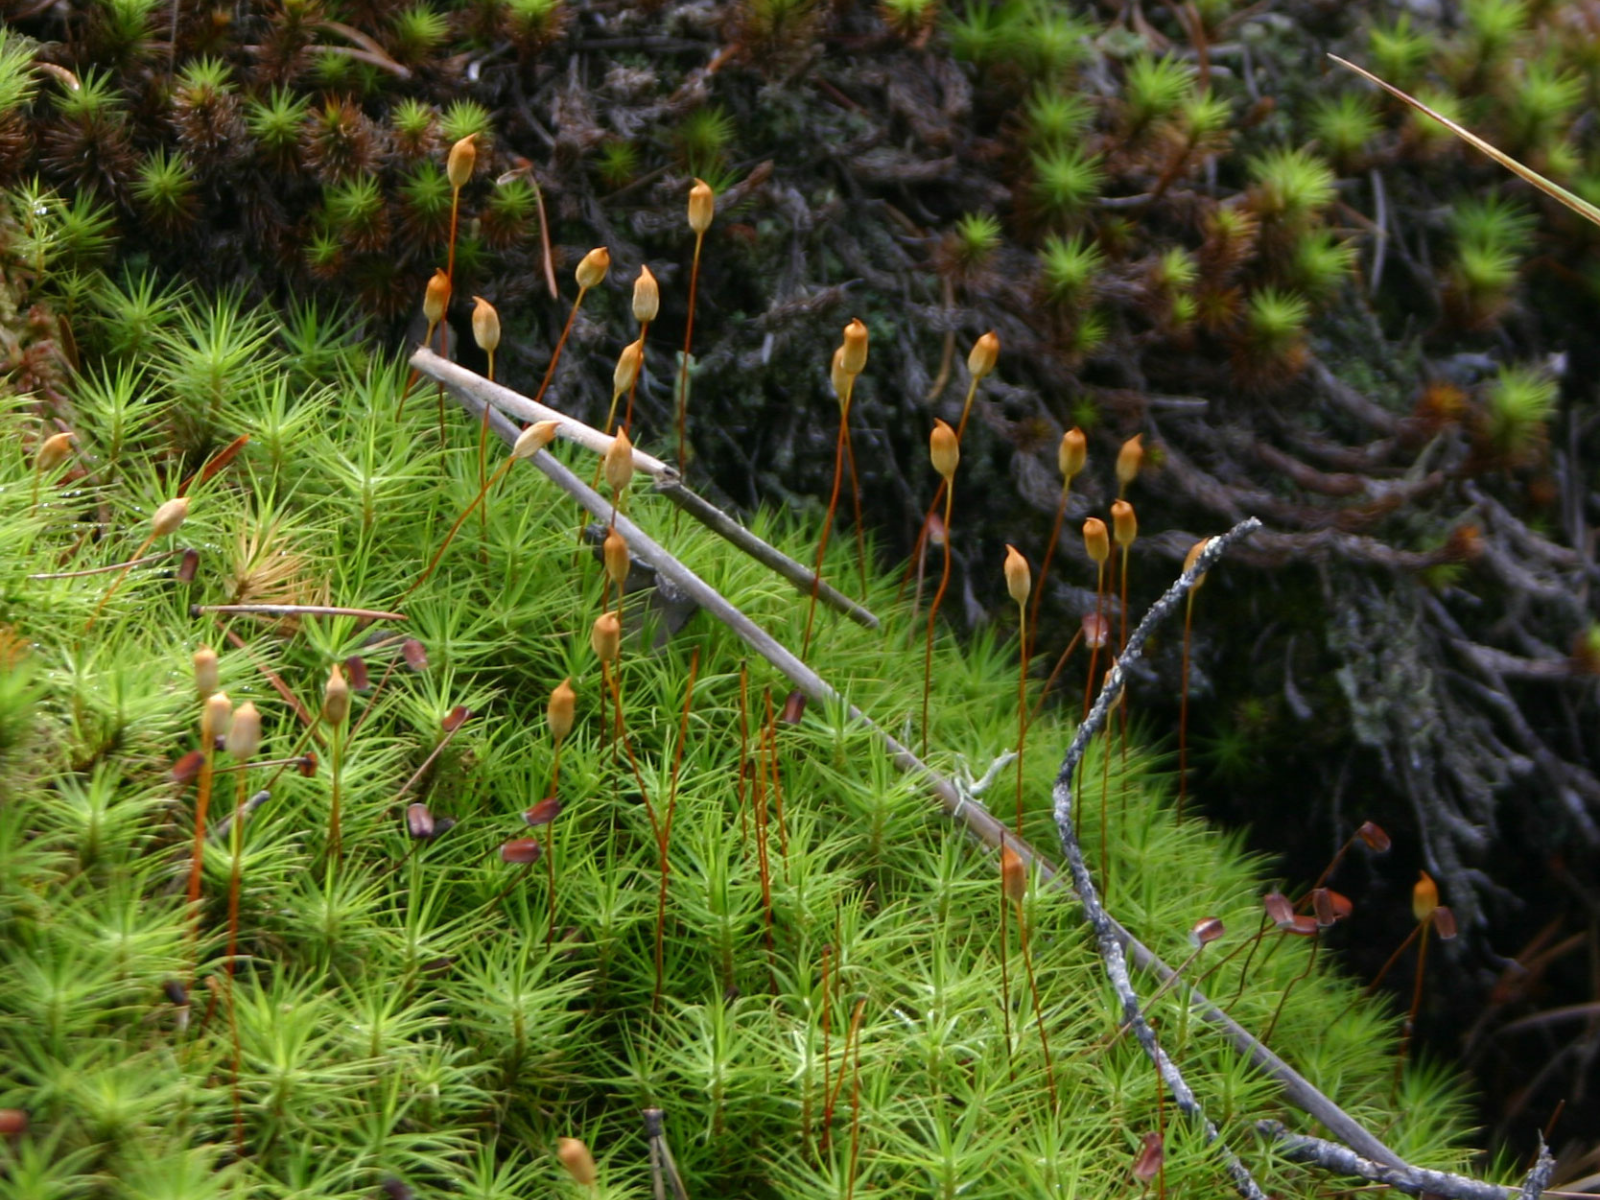 Small spores growing from the tips of fern branches.